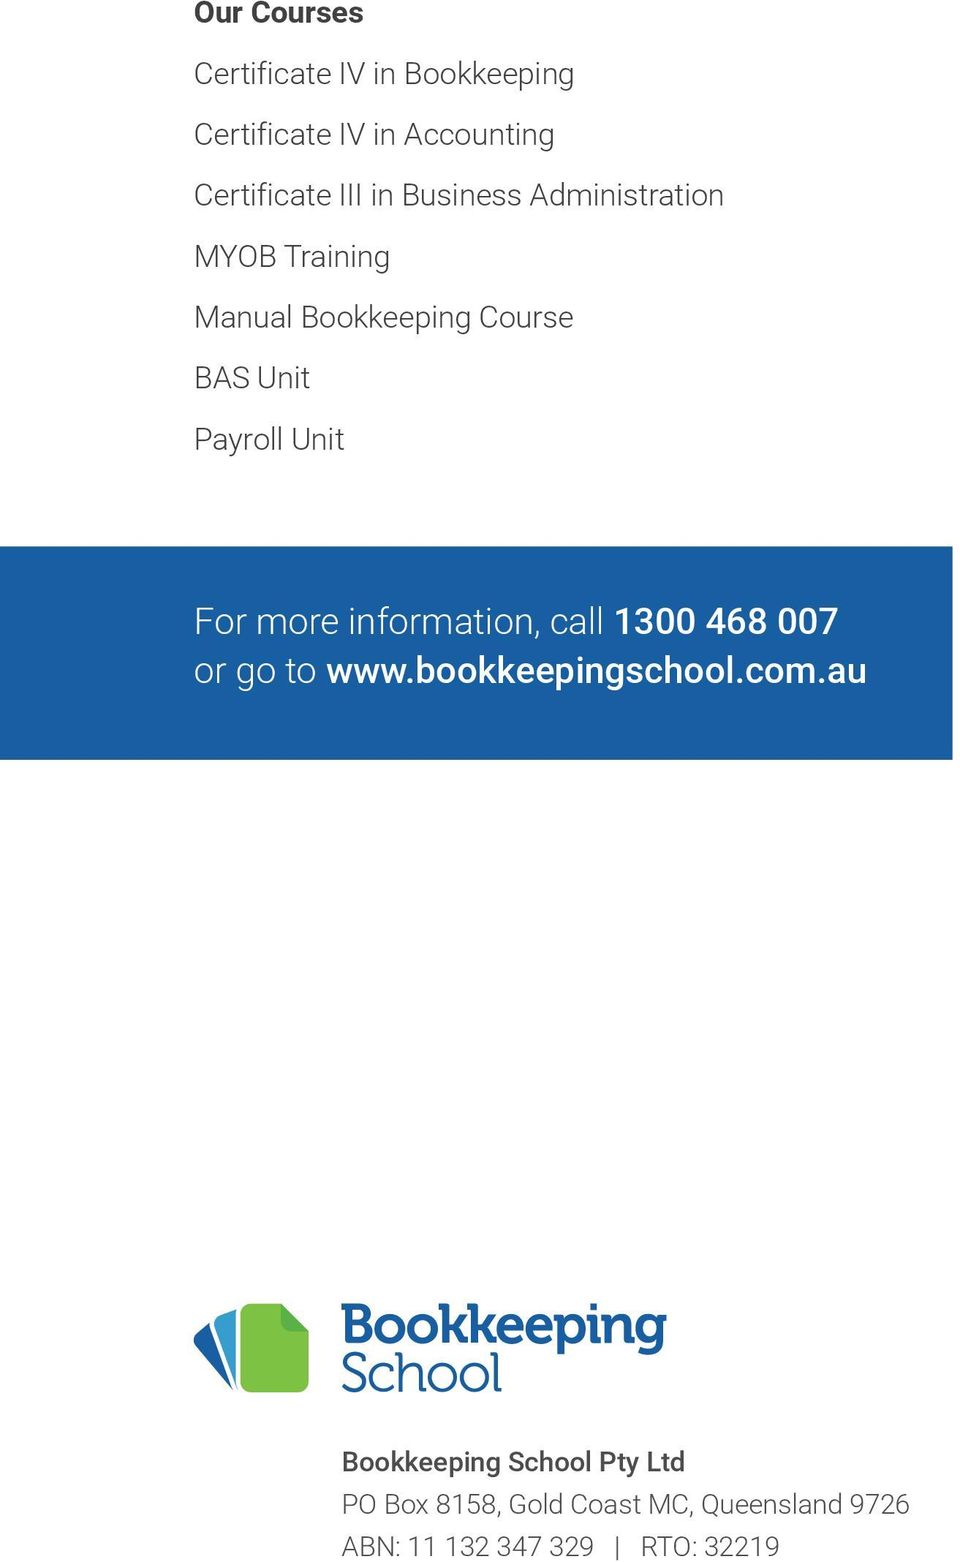 For more information, call 1300 468 007 or go to www.bookkeepingschool.com.